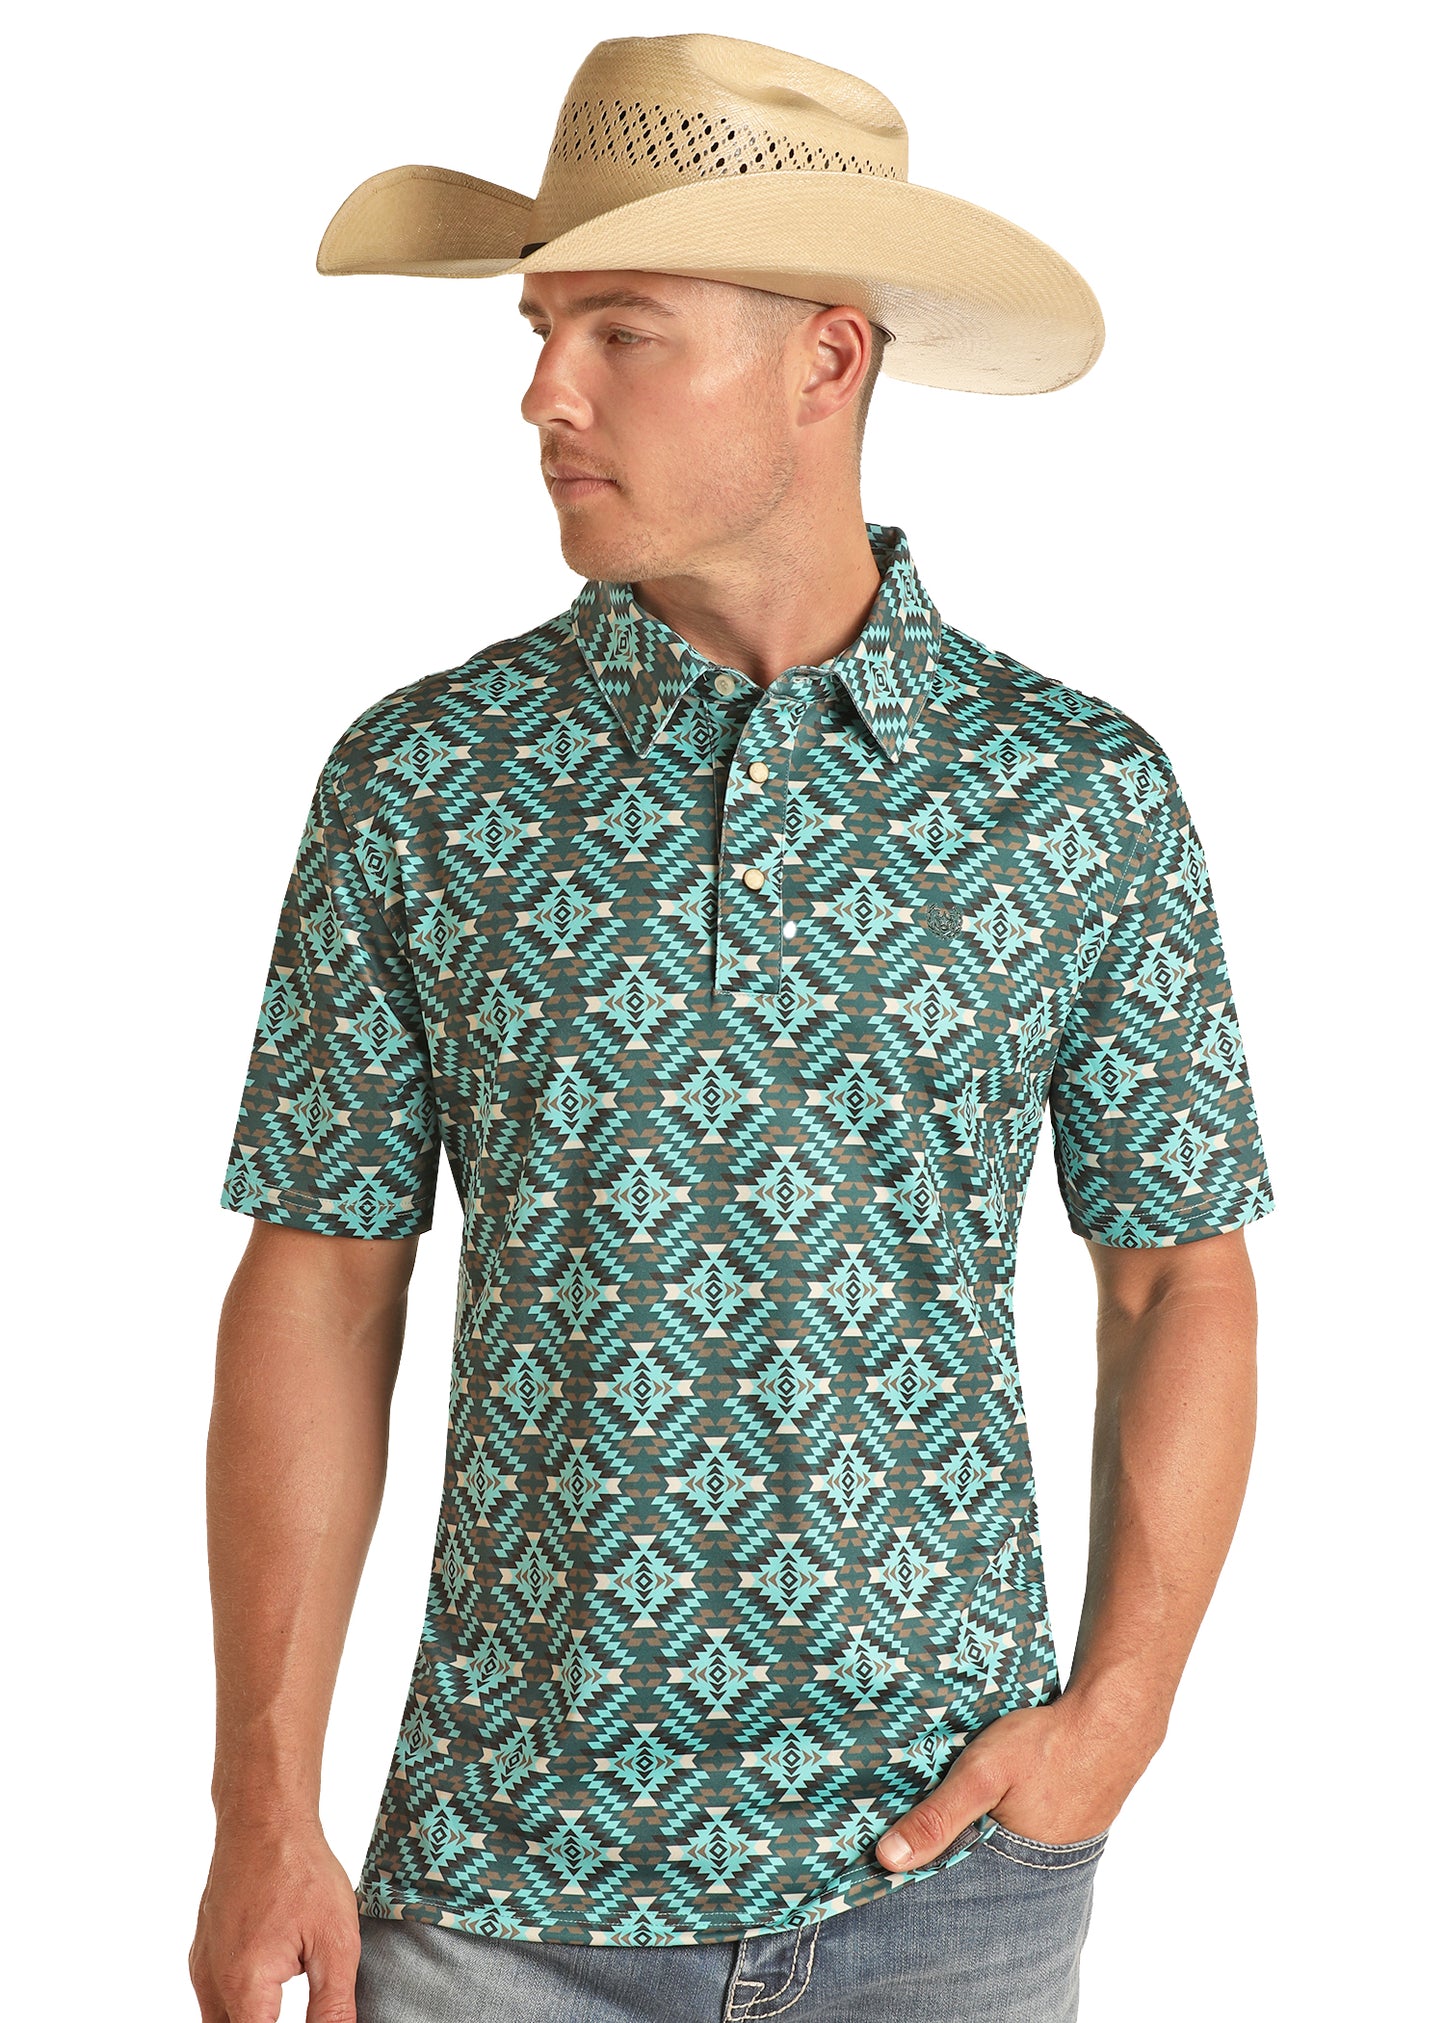 Rock & Roll Panhandle Performance Men's Aztec Snap Knit Short Sleeve Polo Turquoise